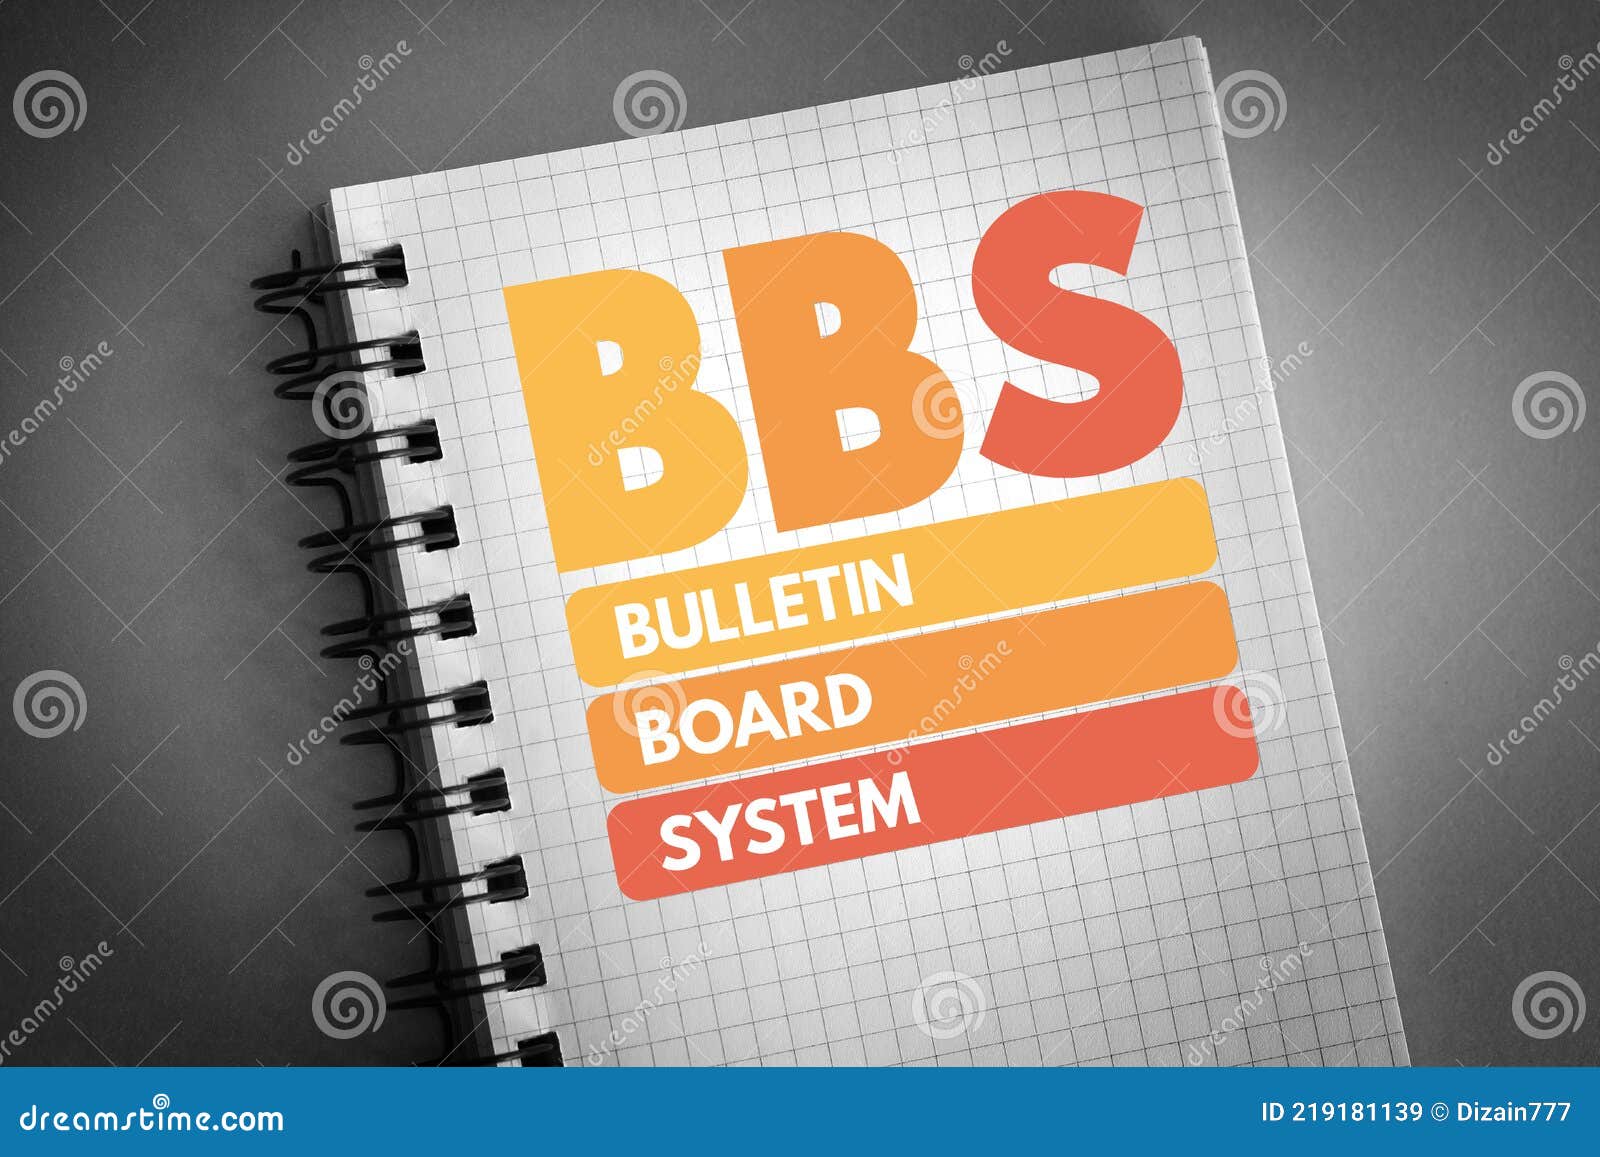 bbs - bulletin board system acronym on notepad, technology concept background